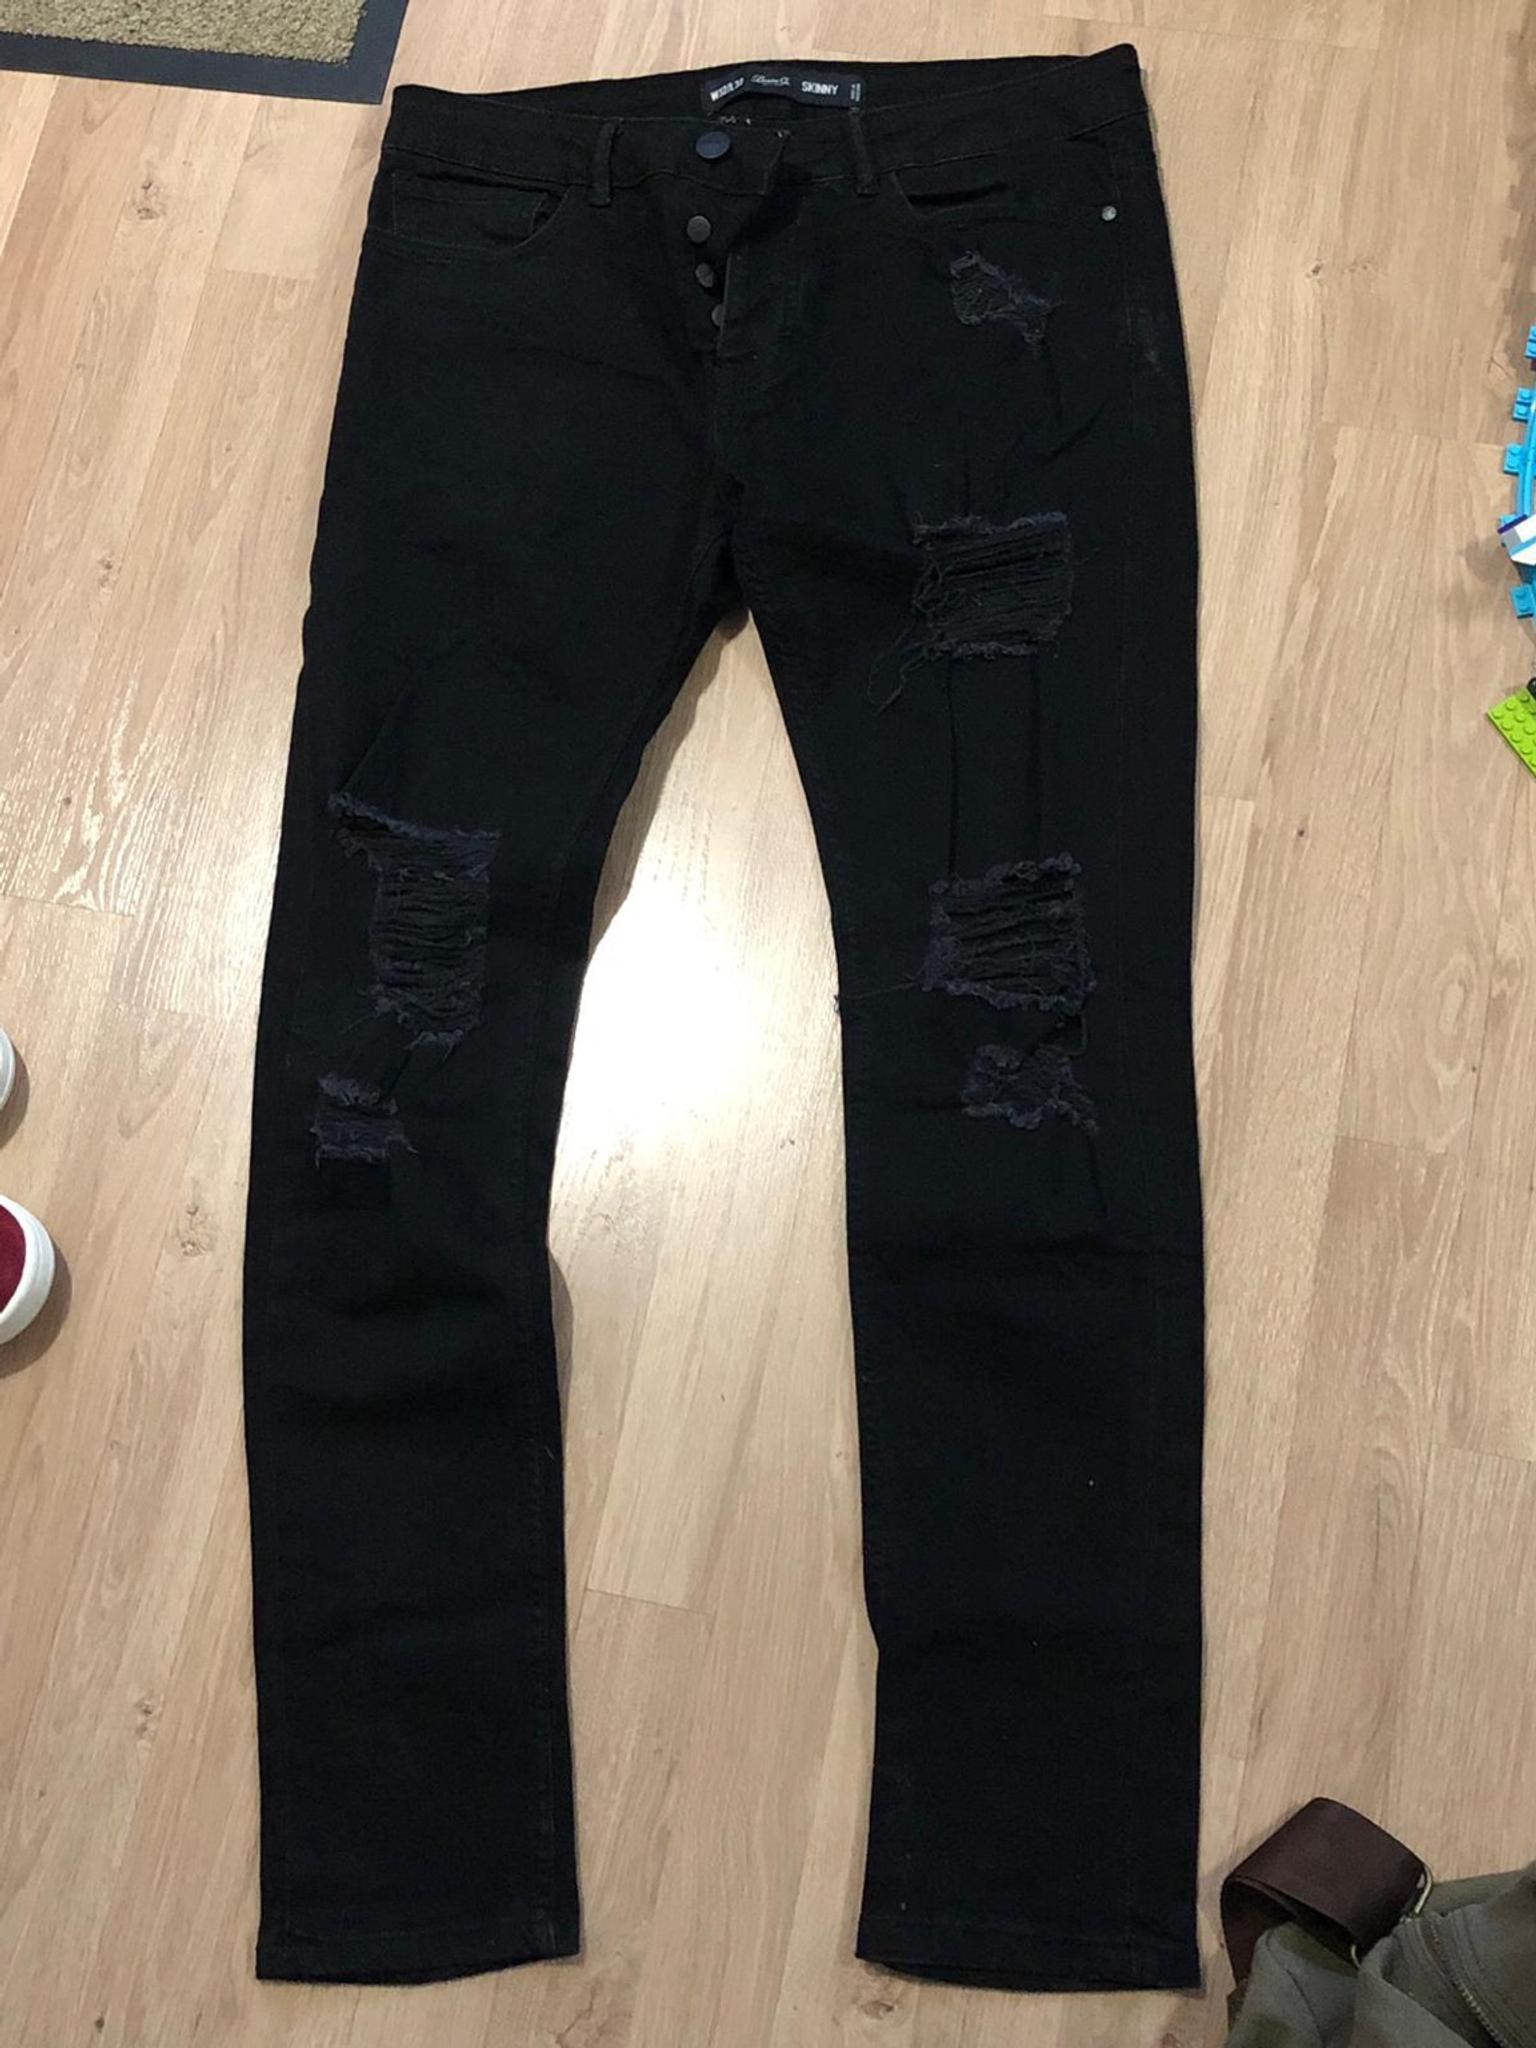 ripped jeans mens primark